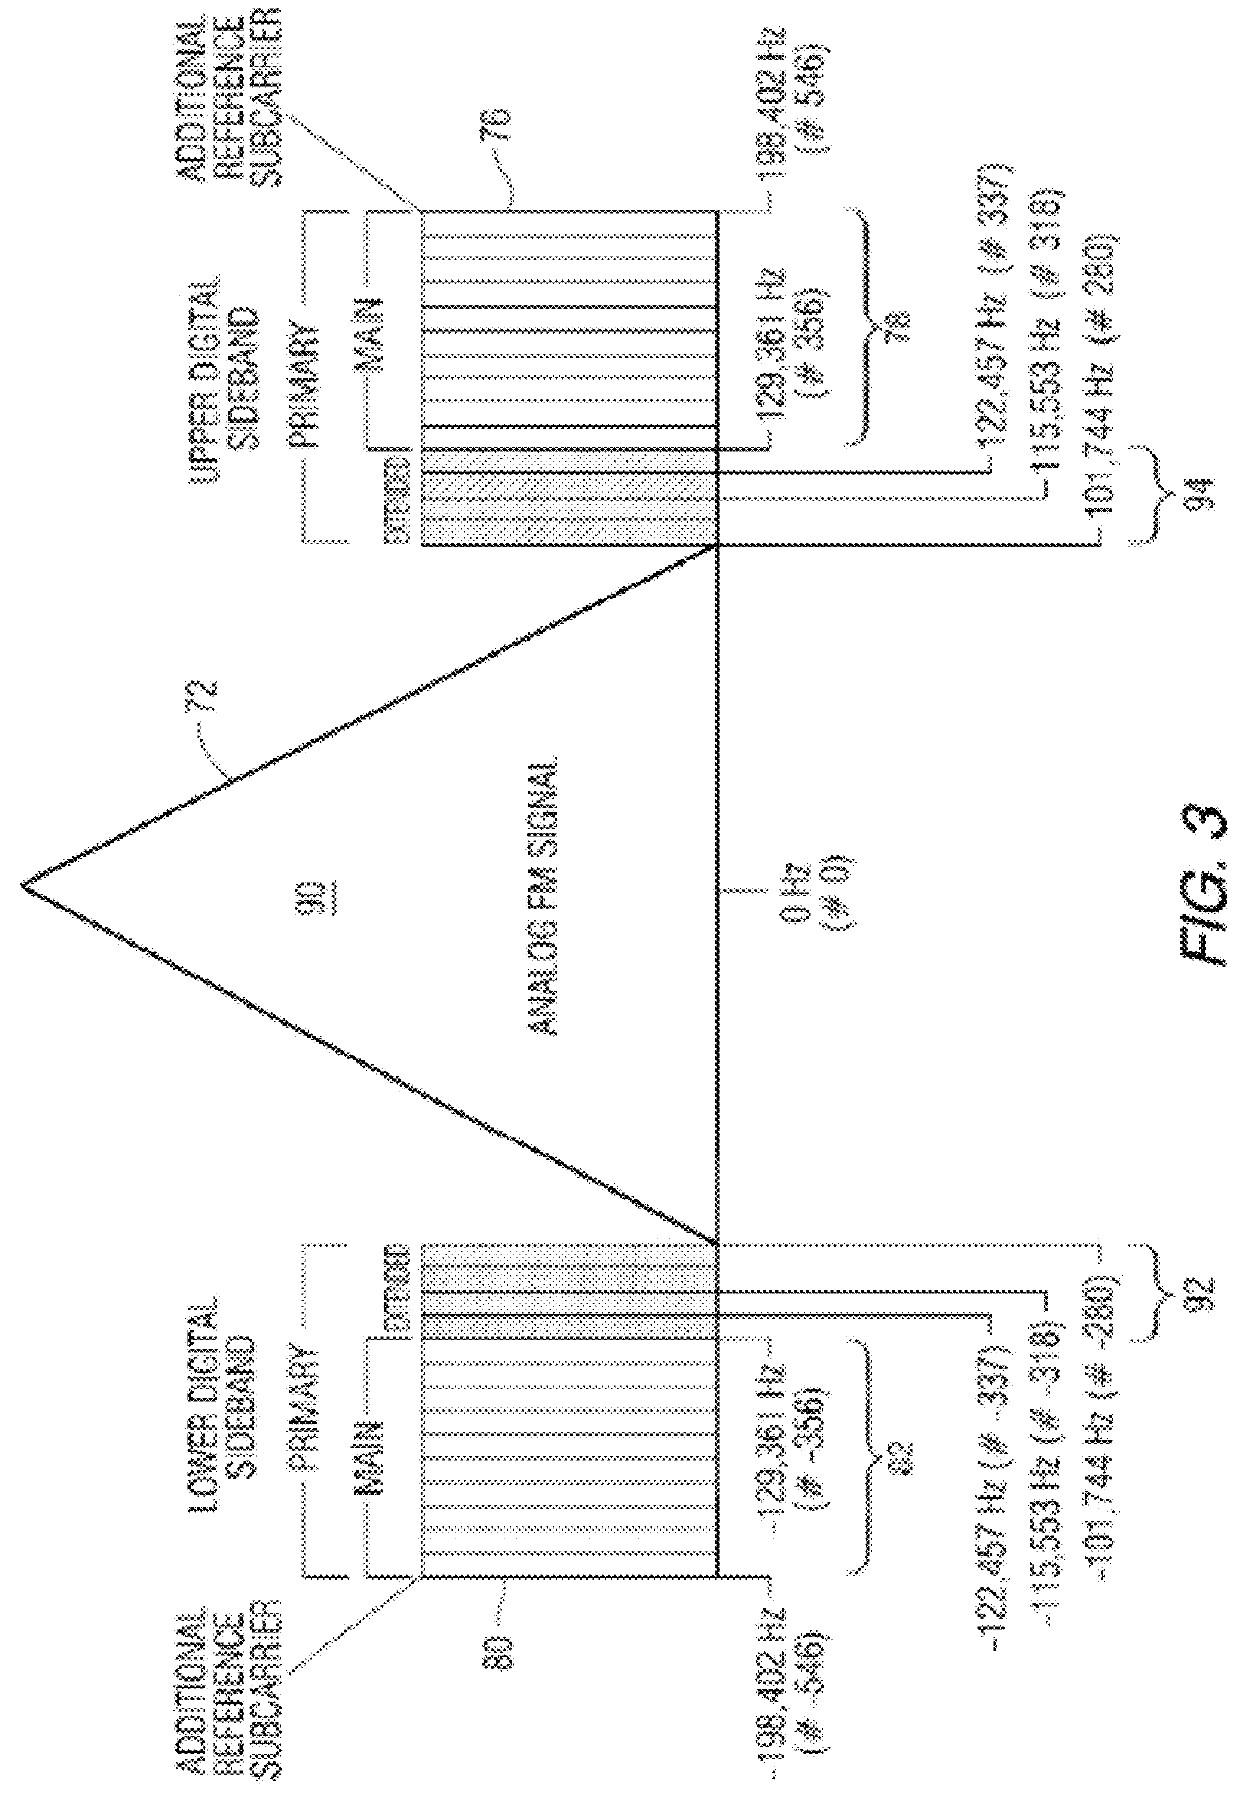 System and method for increasing throughput in digital radio broadcast receiver